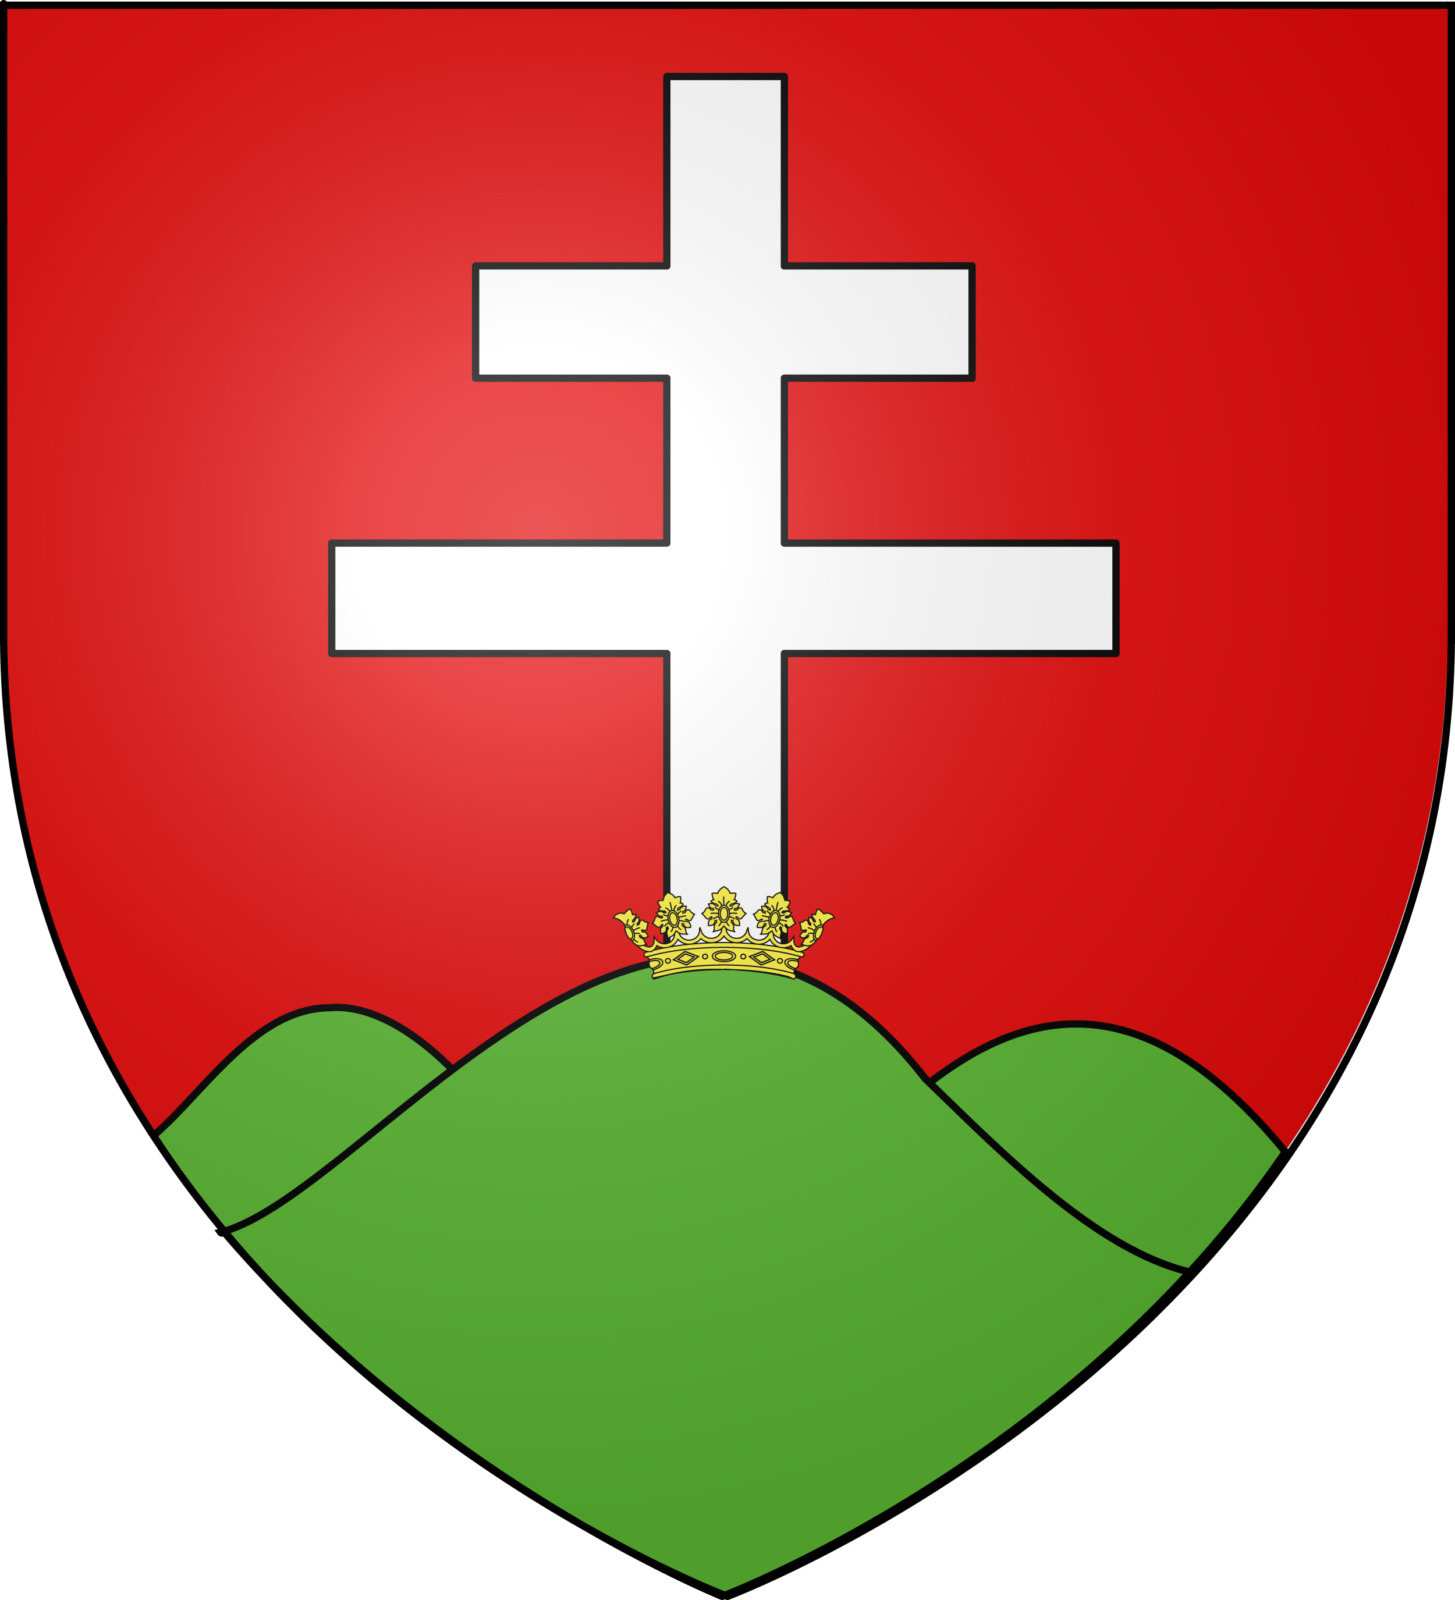 Coat of arms of Hungary